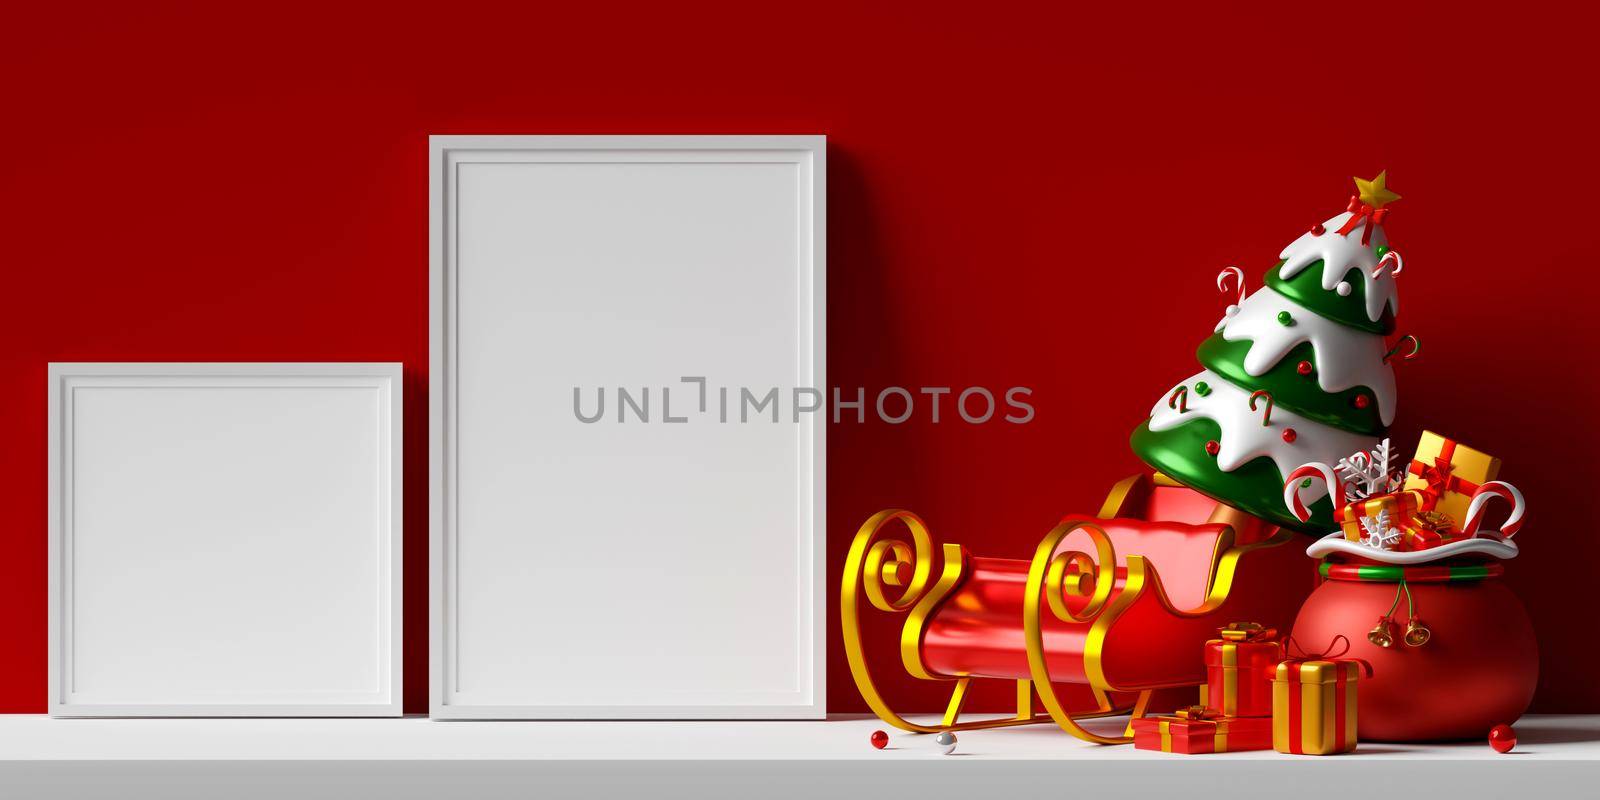 3d illustration of 2 photo frames mockup with sleigh and Christmas bag  by nutzchotwarut